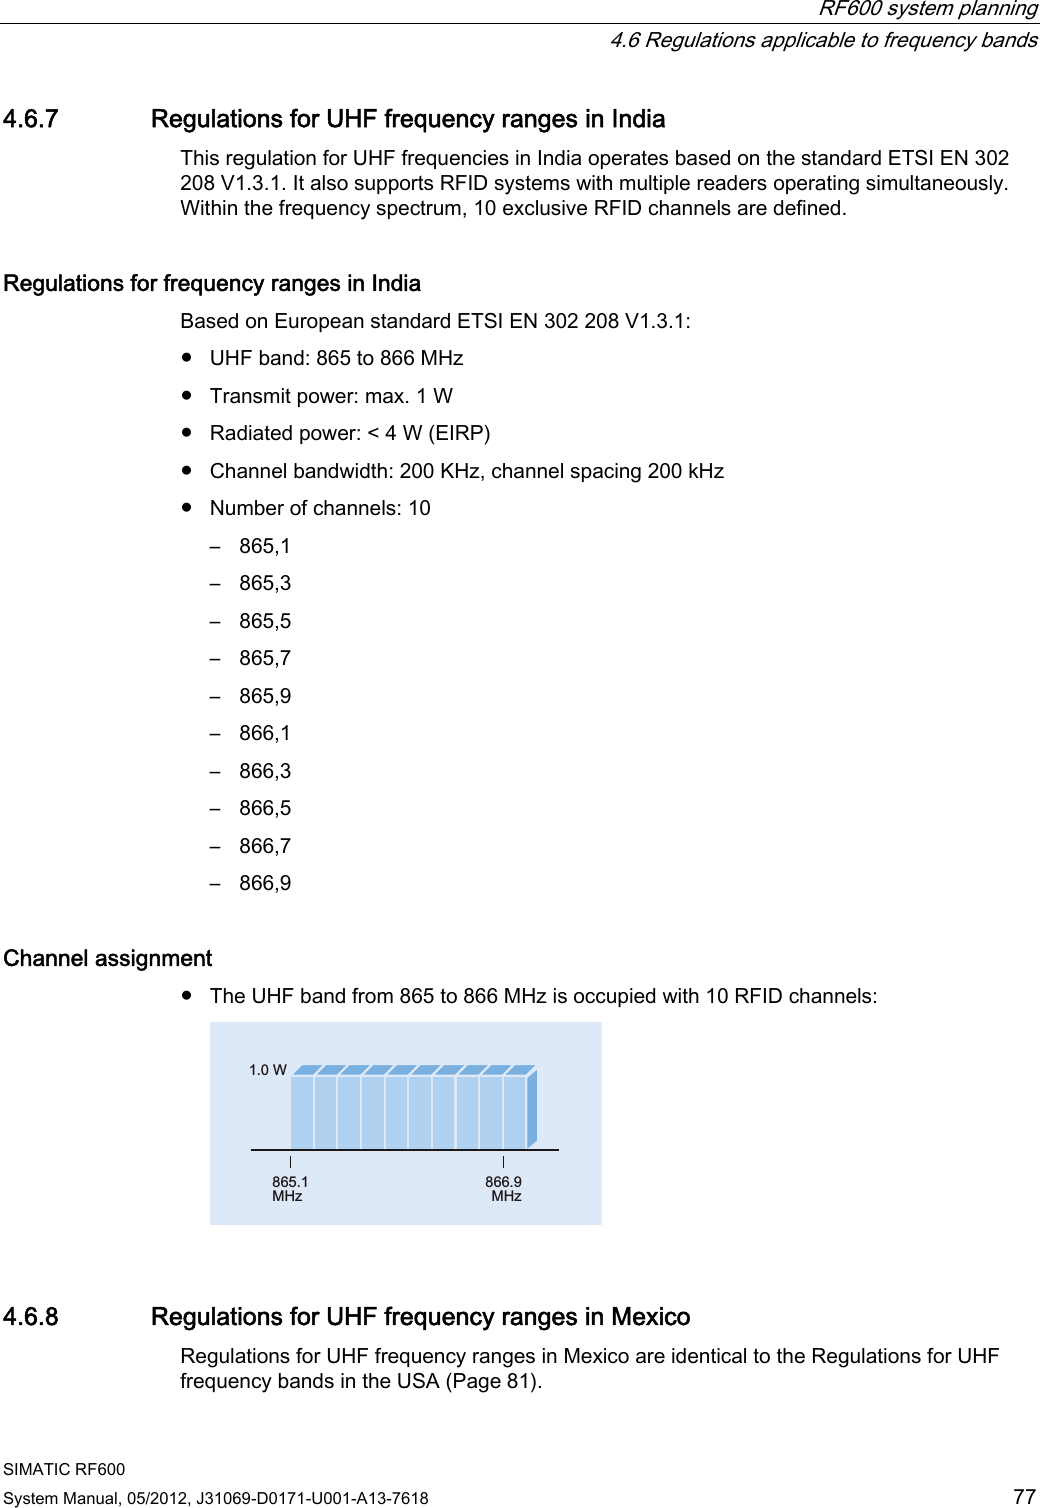  RF600 system planning   4.6 Regulations applicable to frequency bands SIMATIC RF600 System Manual, 05/2012, J31069-D0171-U001-A13-7618  77 4.6.7 Regulations for UHF frequency ranges in India This regulation for UHF frequencies in India operates based on the standard ETSI EN 302 208 V1.3.1. It also supports RFID systems with multiple readers operating simultaneously. Within the frequency spectrum, 10 exclusive RFID channels are defined. Regulations for frequency ranges in India   Based on European standard ETSI EN 302 208 V1.3.1: ●  UHF band: 865 to 866 MHz ●  Transmit power: max. 1 W ●  Radiated power: &lt; 4 W (EIRP) ●  Channel bandwidth: 200 KHz, channel spacing 200 kHz ●  Number of channels: 10 –  865,1 –  865,3 –  865,5 –  865,7 –  865,9 –  866,1 –  866,3 –  866,5 –  866,7 –  866,9 Channel assignment ●  The UHF band from 865 to 866 MHz is occupied with 10 RFID channels: :0+]0+] 4.6.8 Regulations for UHF frequency ranges in Mexico Regulations for UHF frequency ranges in Mexico are identical to the Regulations for UHF frequency bands in the USA (Page 81). 